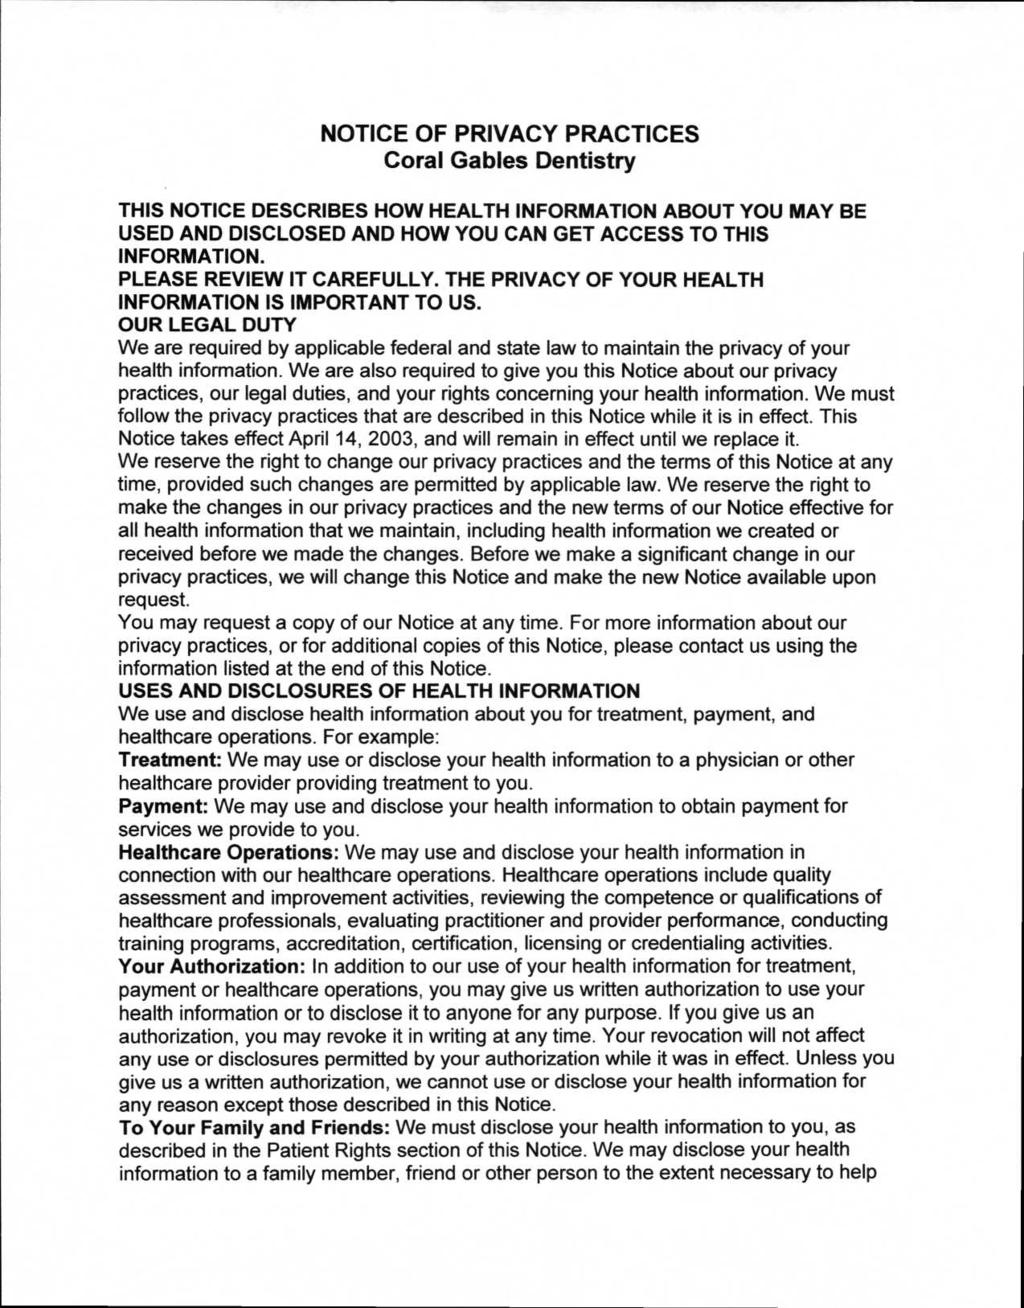 NOTICE OF PRIVACY PRACTICES Coral Gables Dentistry THIS NOTICE DESCRIBES HOW HEALTH INFORMATION ABOUT YOU MAY BE USED AND DISCLOSED AND HOW YOU CAN GET ACCESS TO THIS INFORMATION.